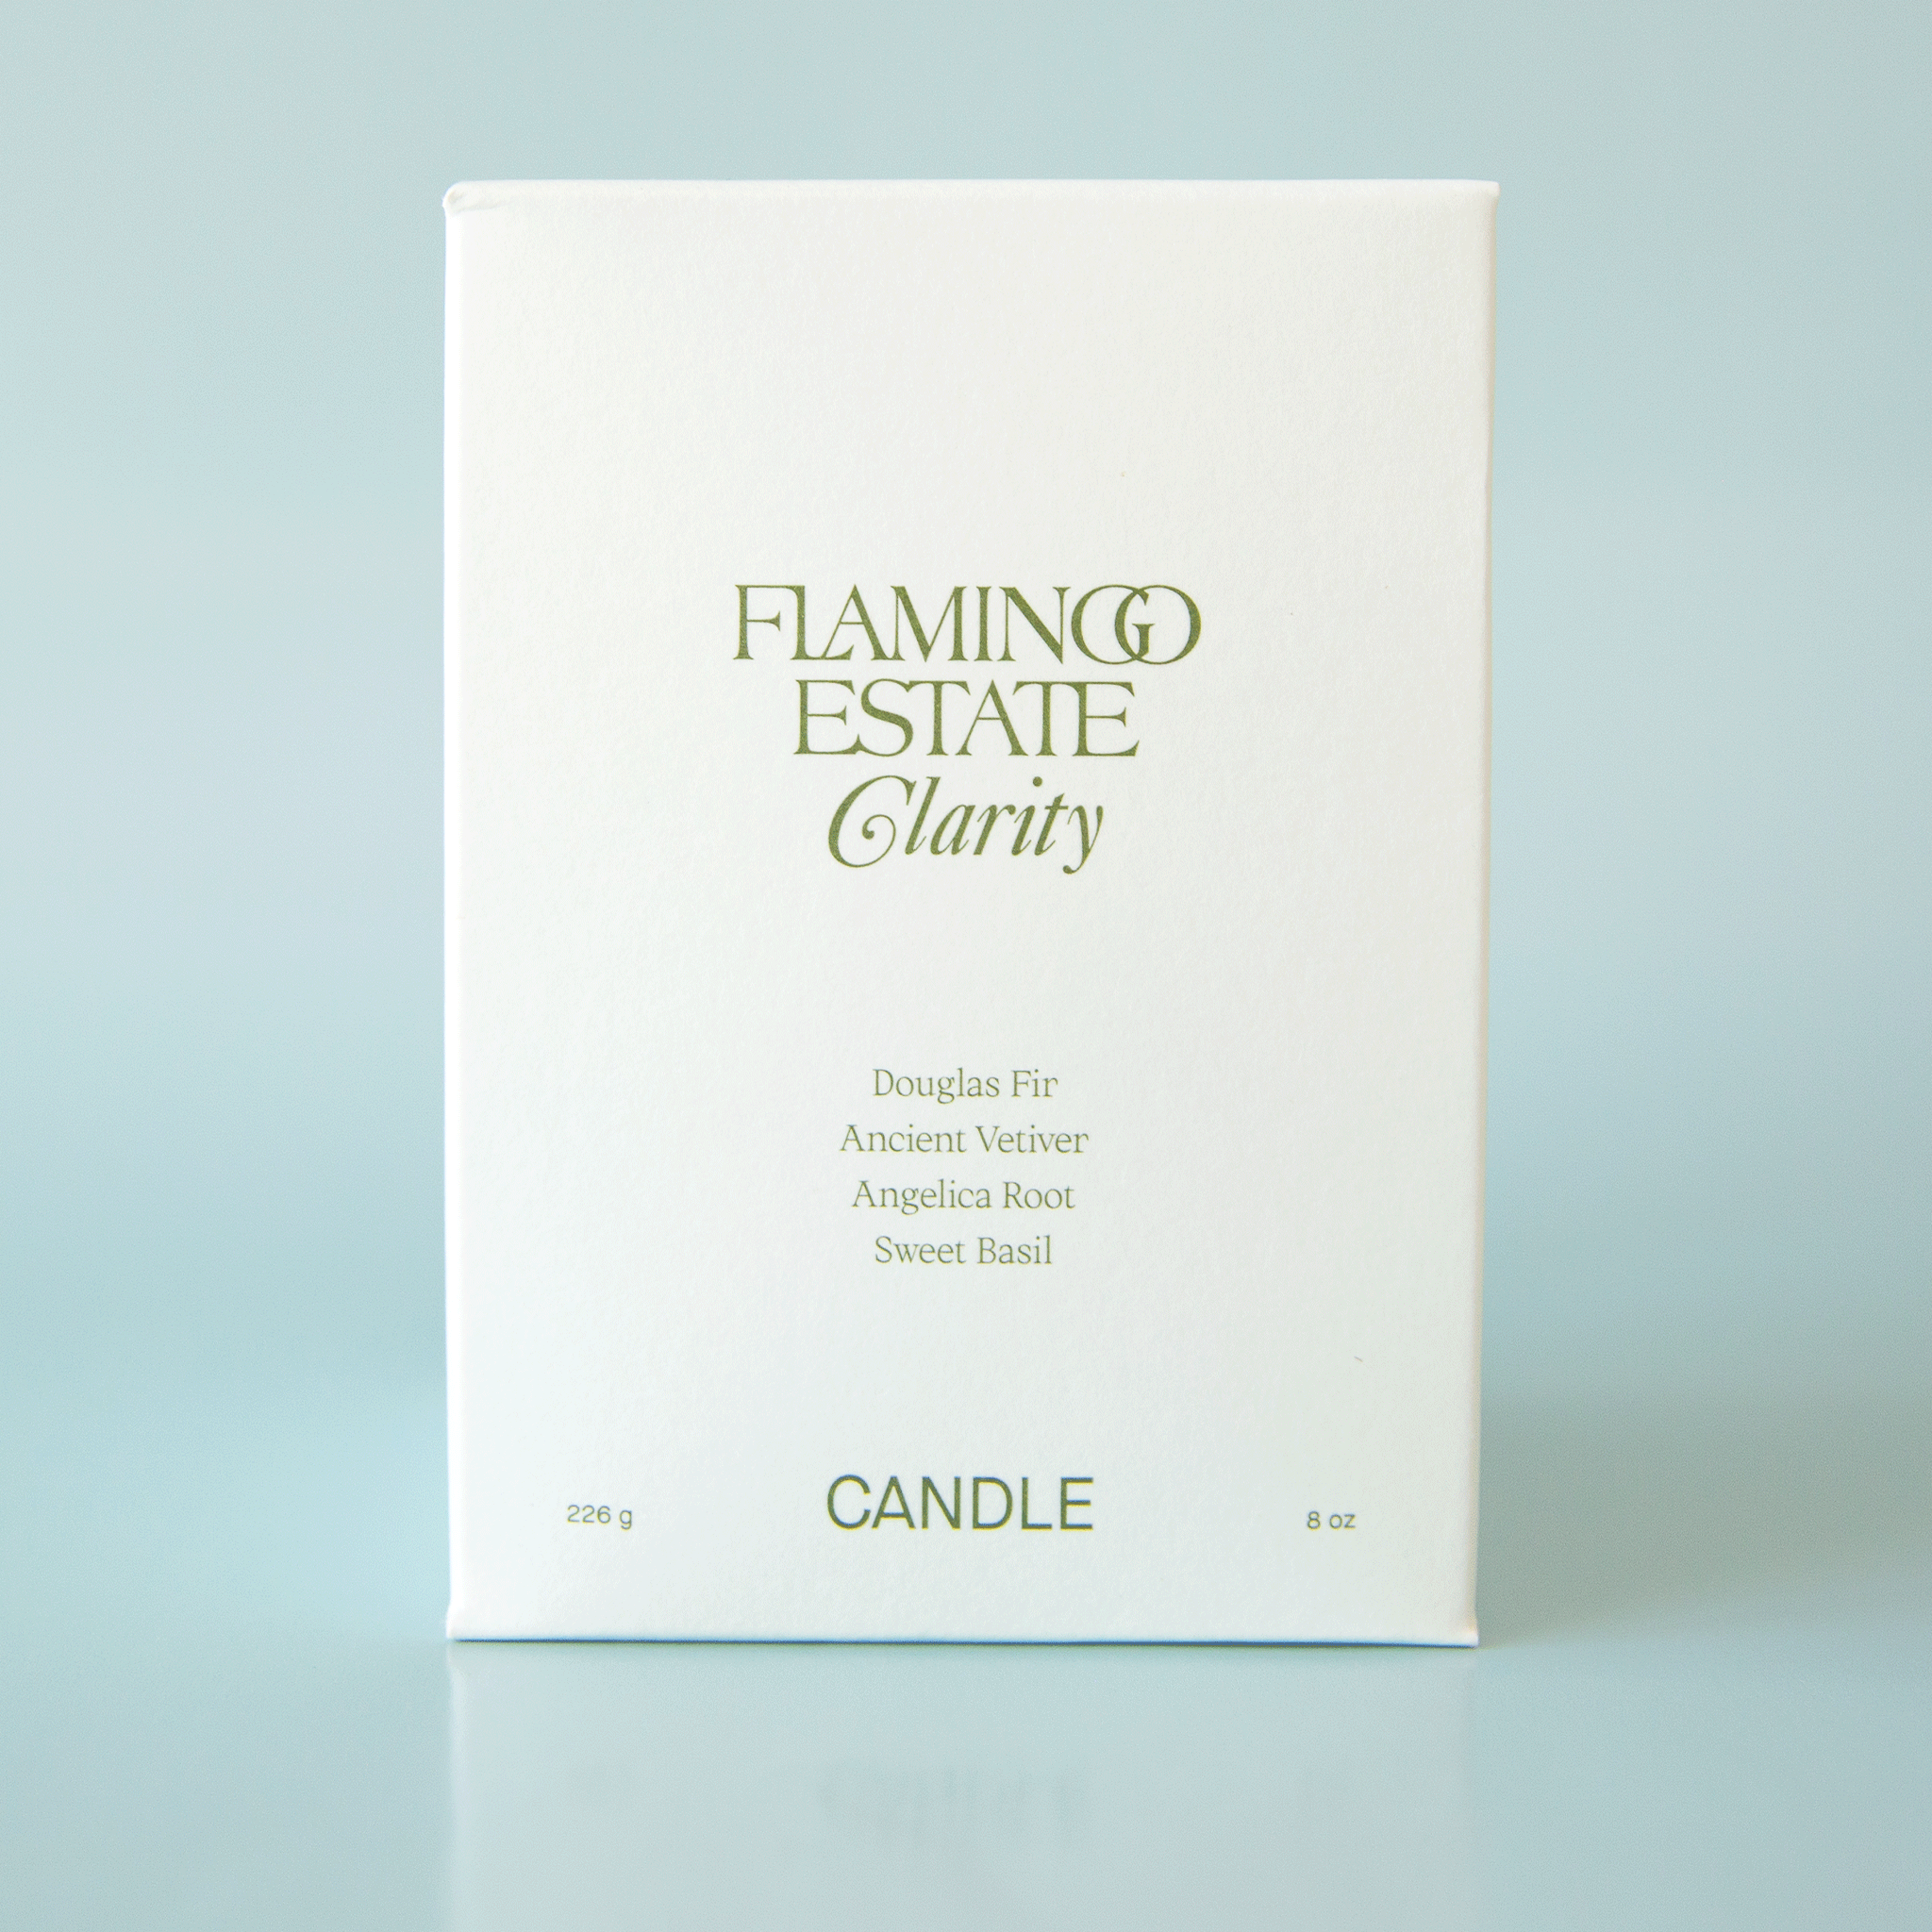 On a blue background is a box containing a green glass candle. The front of the box has green text that reads, &quot;Flamingo Estate Clarity Douglas Fir Ancient Vetiver Angelica Root Sweet Basil&quot;.